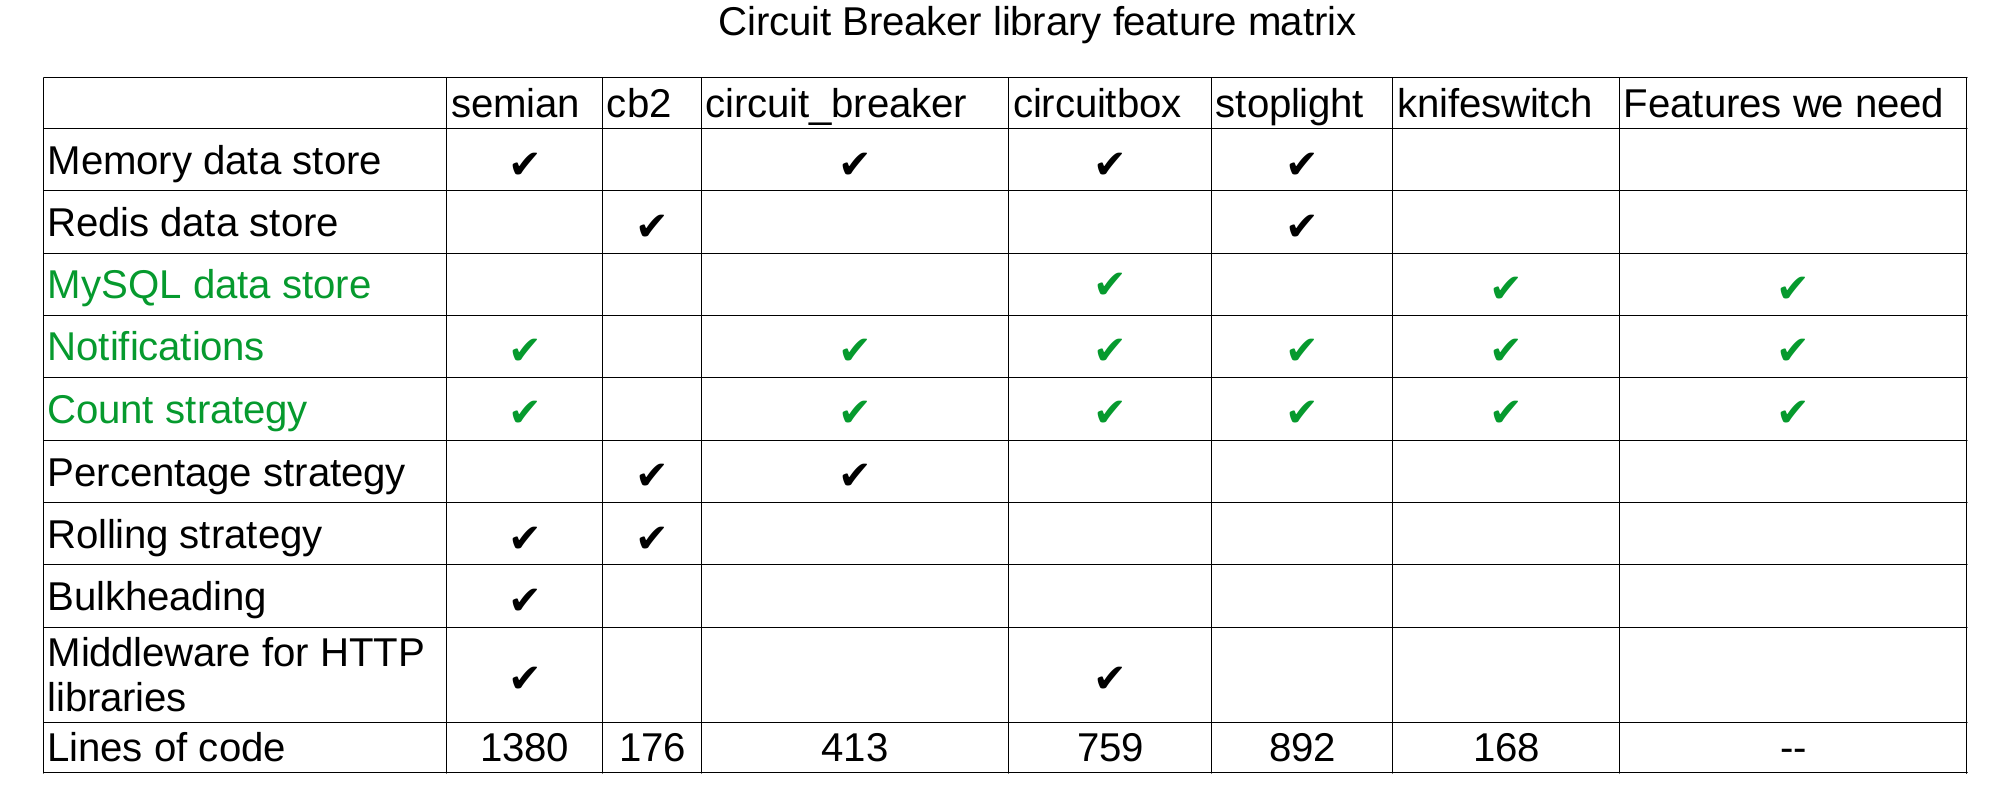 Table showing that Knifeswitch has little code and only the features we need, compared to semian, cb2, circuit_breaker, circuitbox, and stoplight